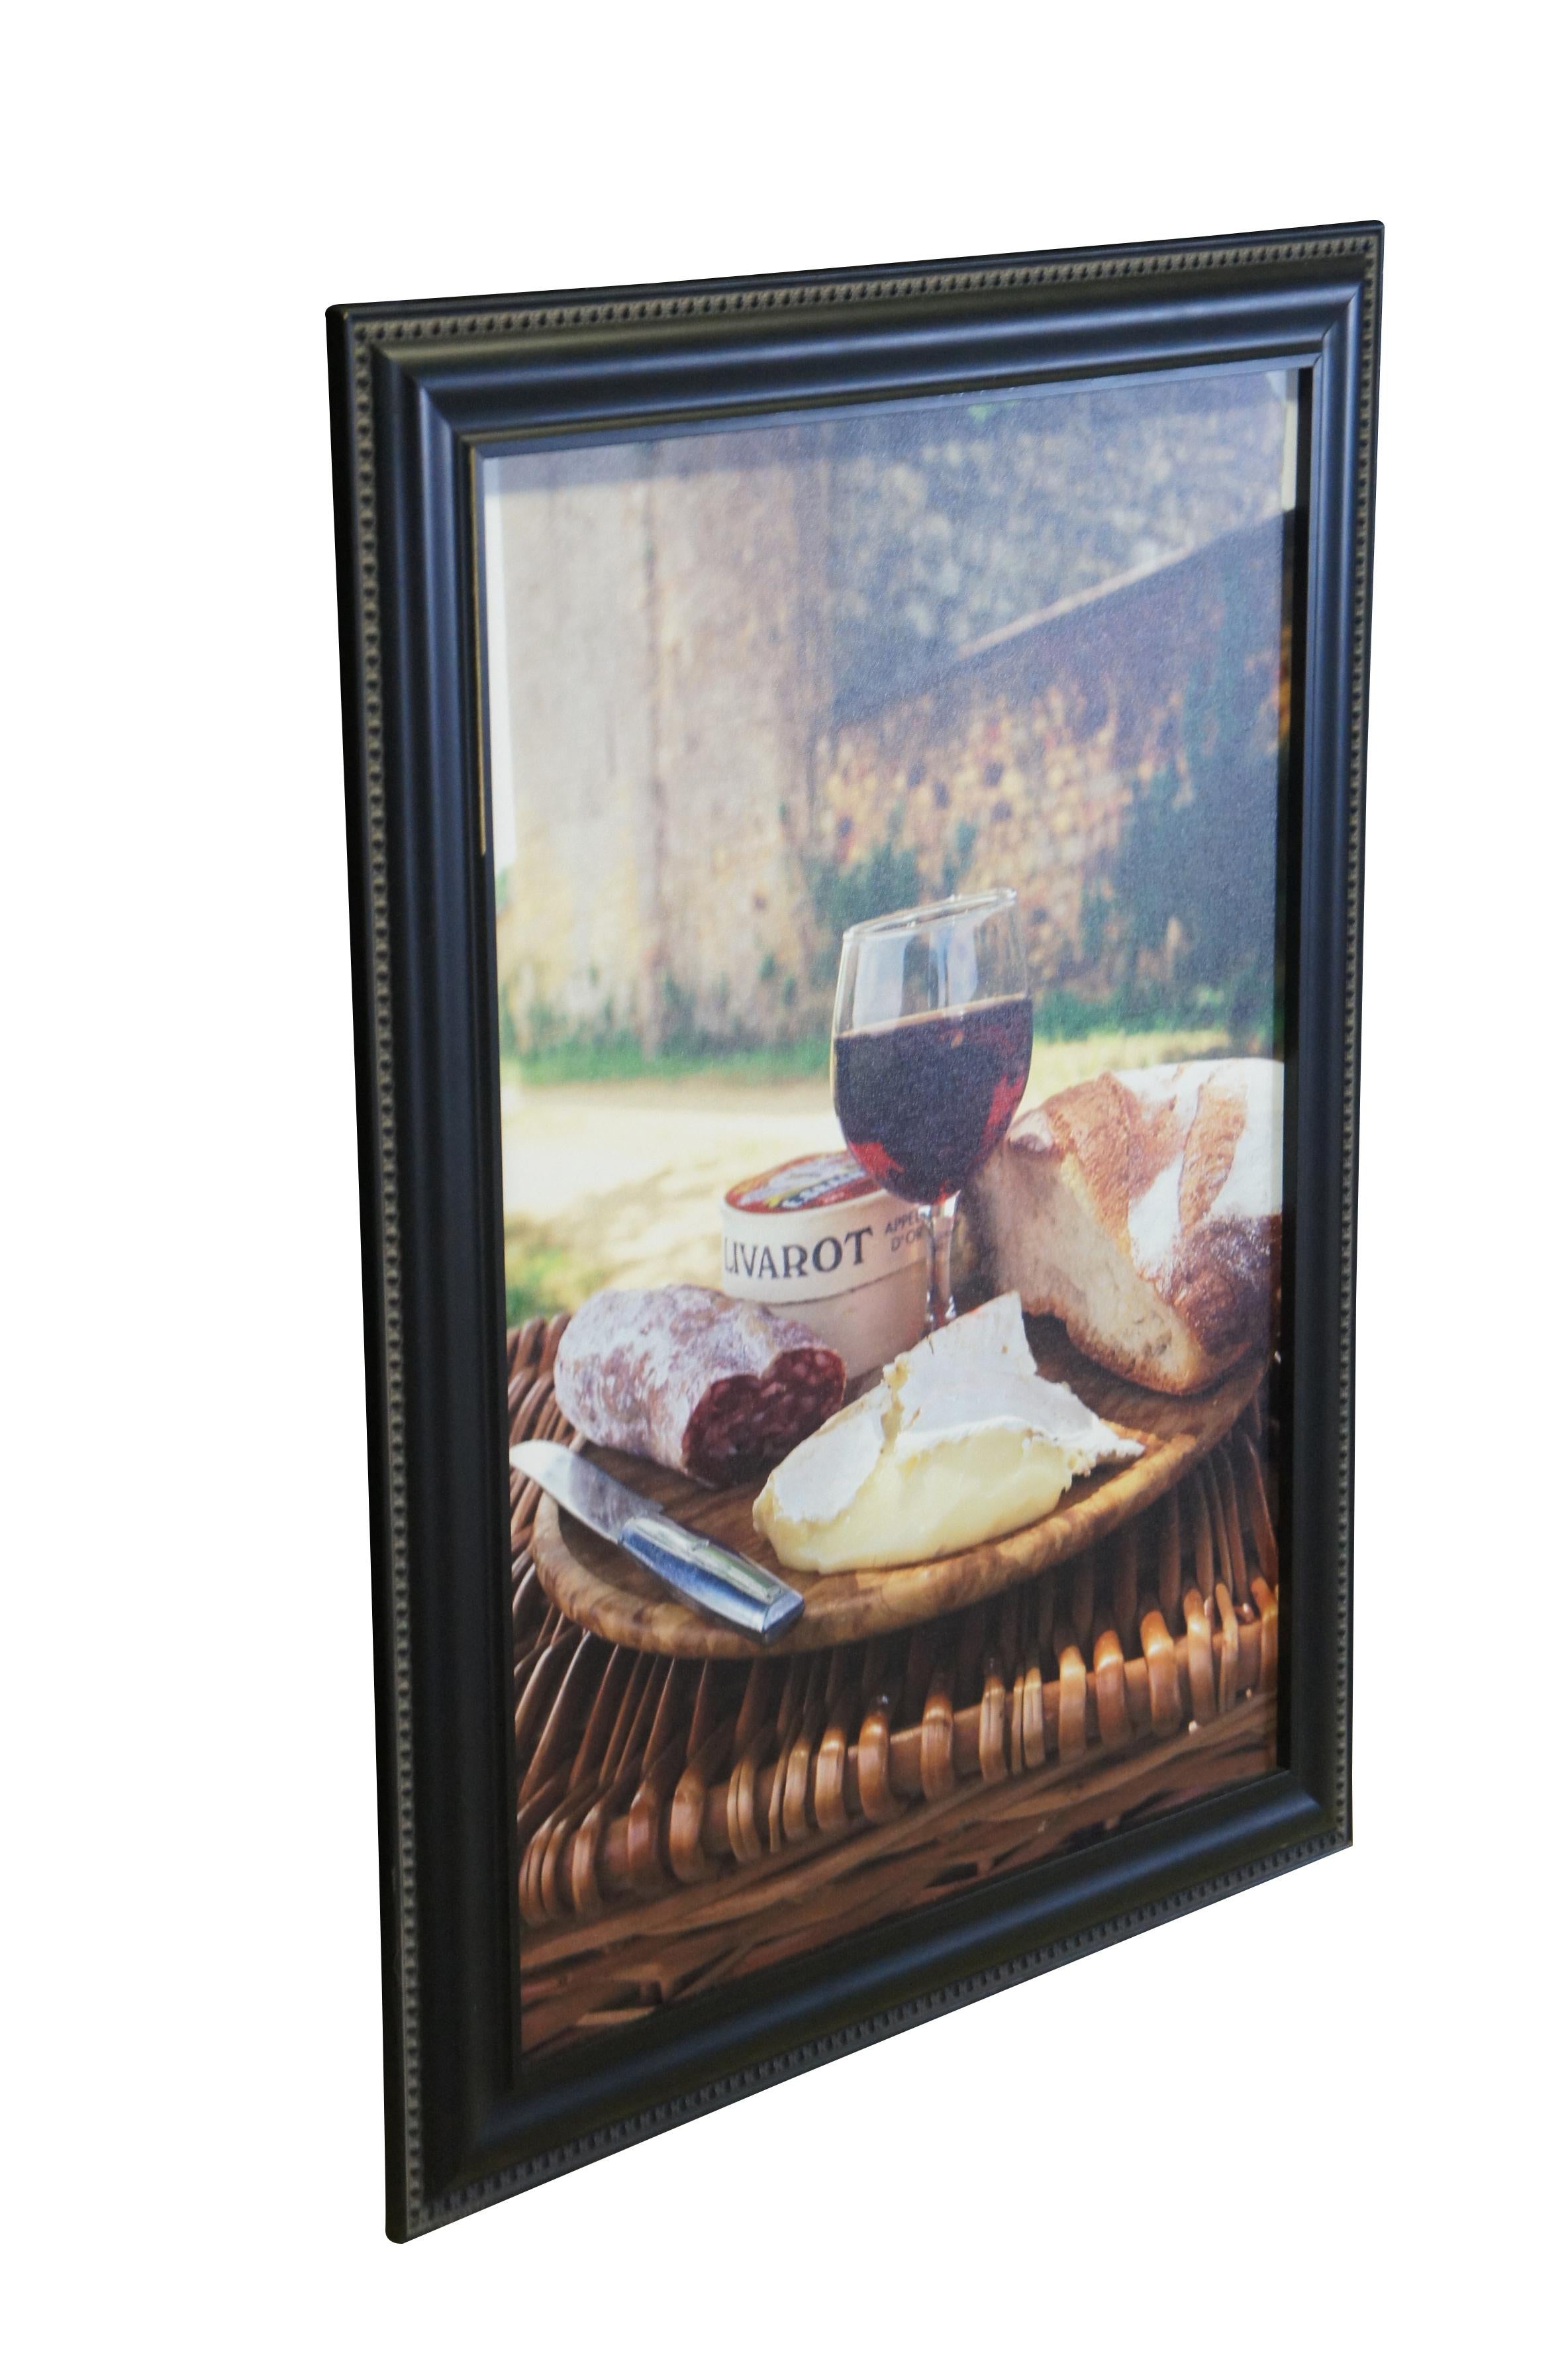 An art print of Dordogne France by Michael Busselle showing bread, glass of red wine, cheese and sausage.

Dimensions:
27